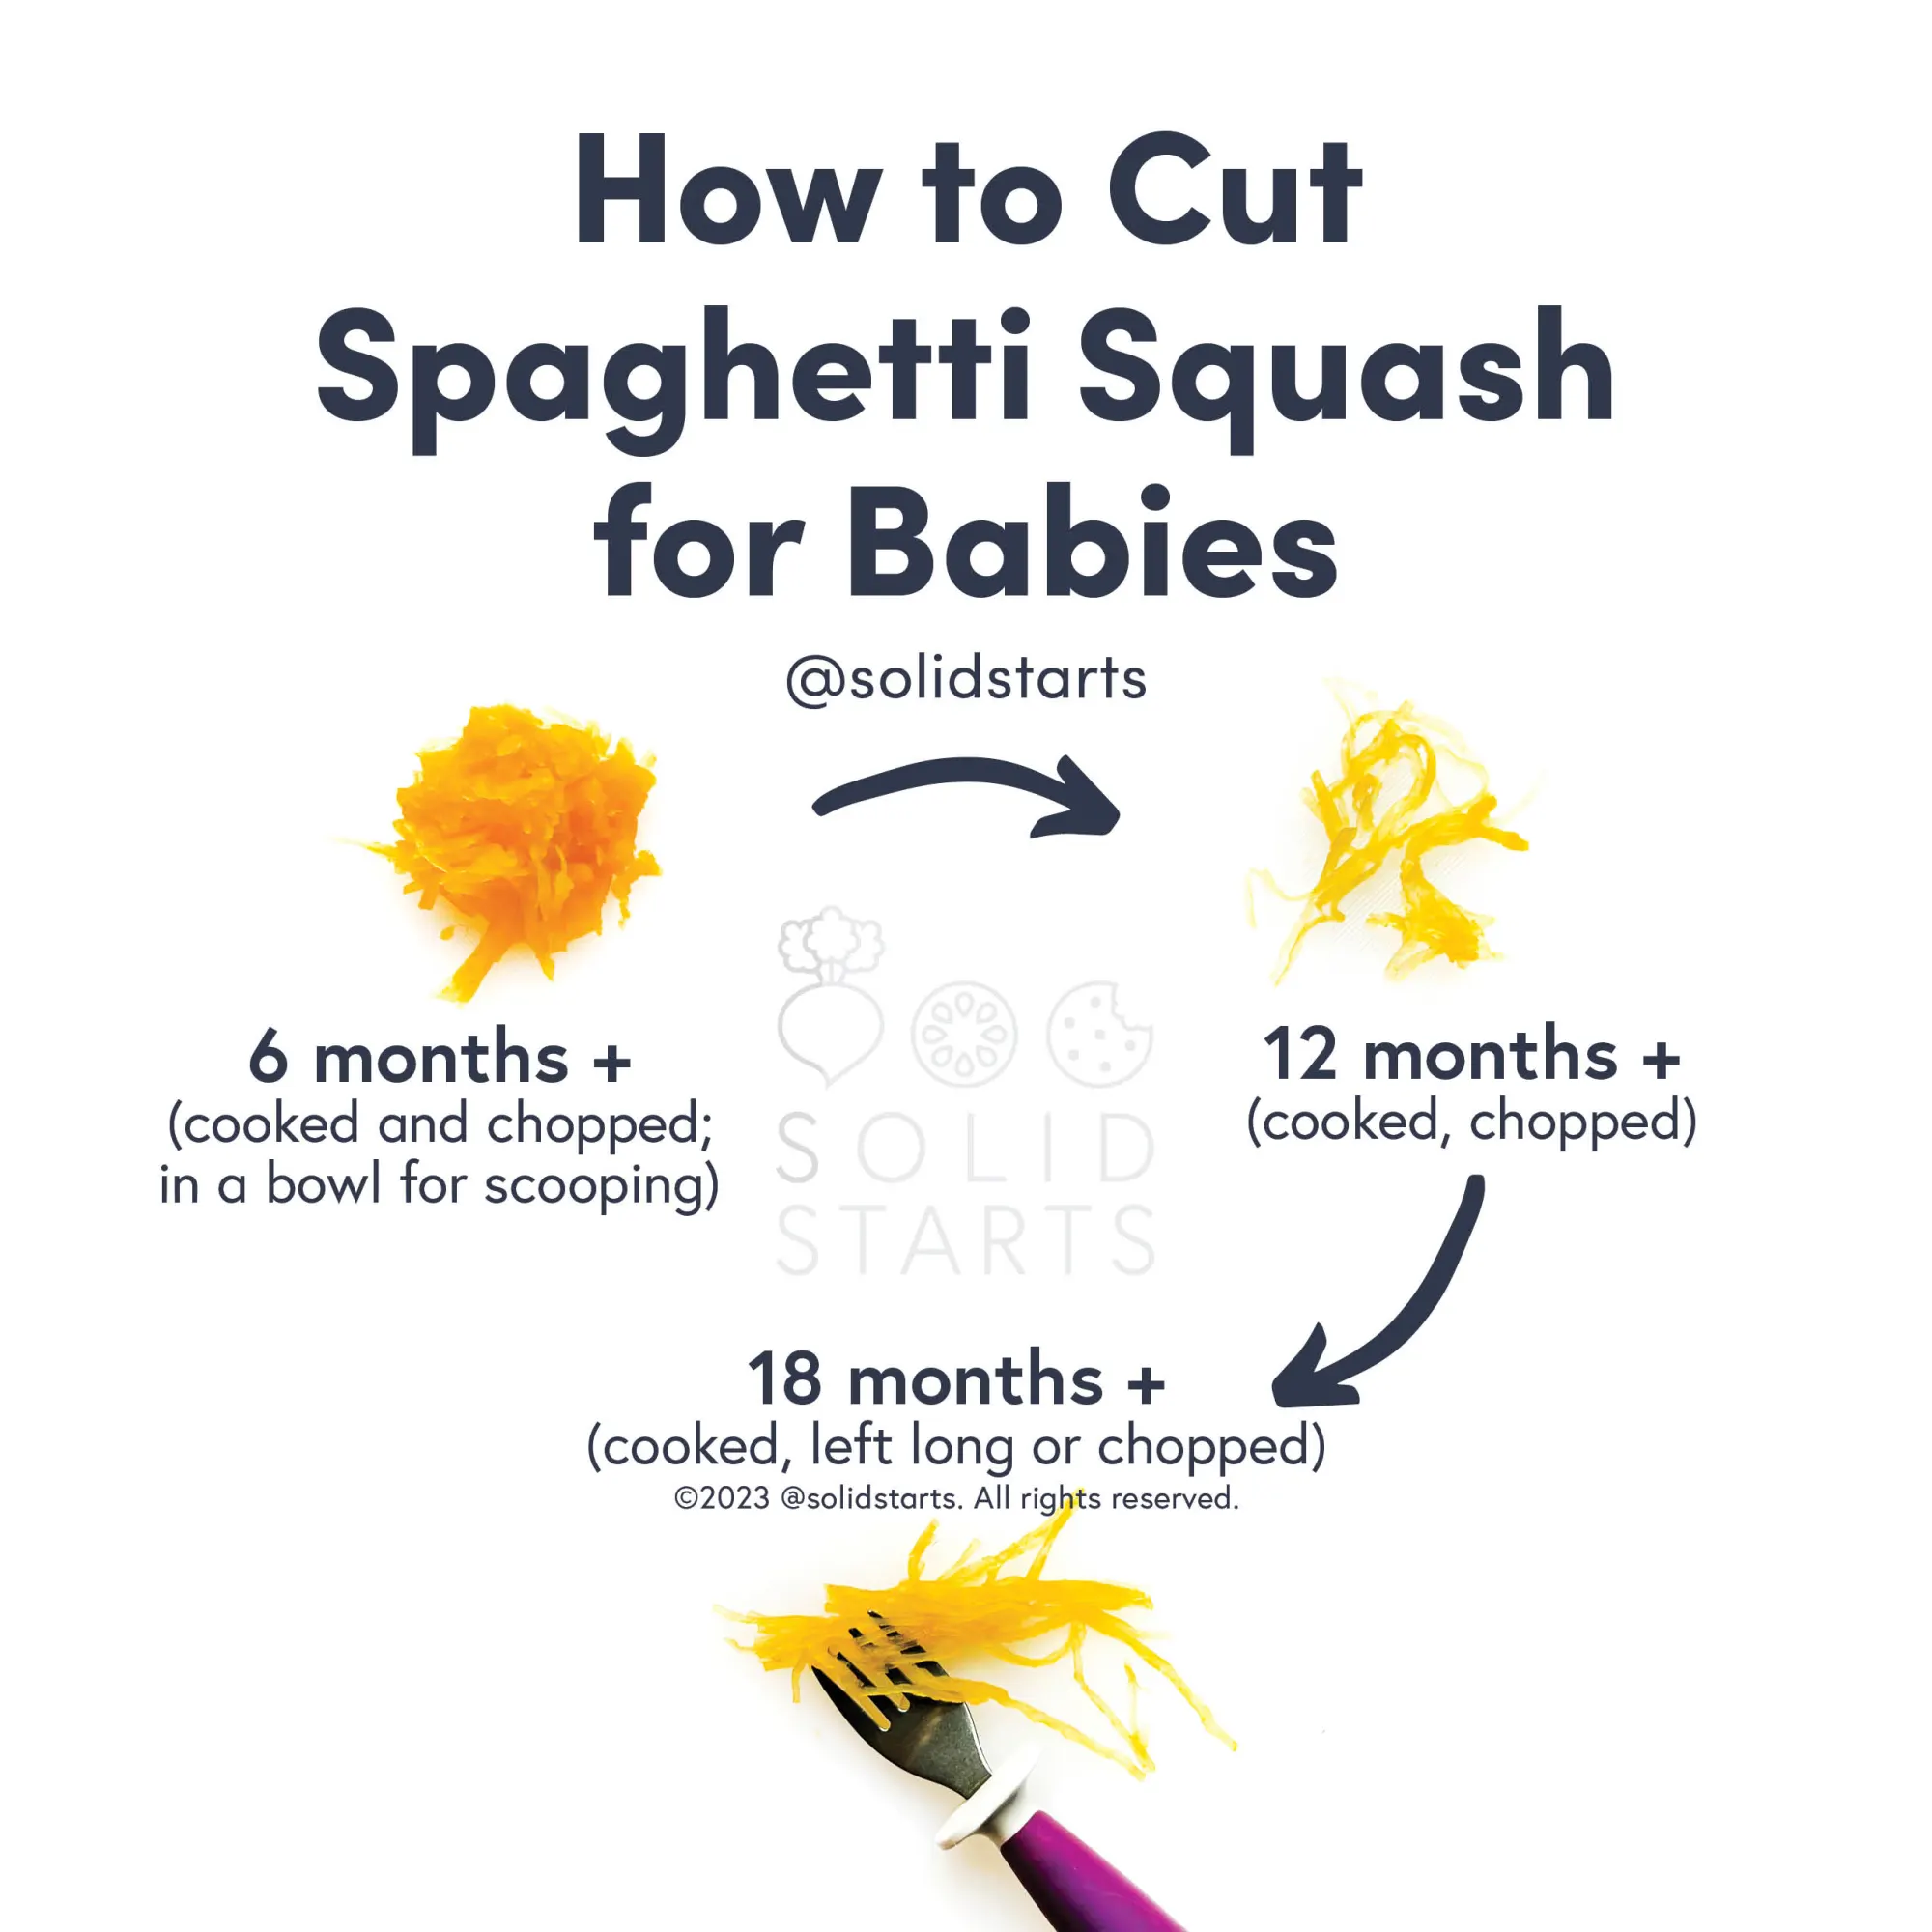 a Solid Starts infographic with the header How to Cut Spaghetti Squash for Babies: cooked and chopped in a bowl for 6 months+, cooked and chopped for 12 months+, and left long or chopped for 18 months+